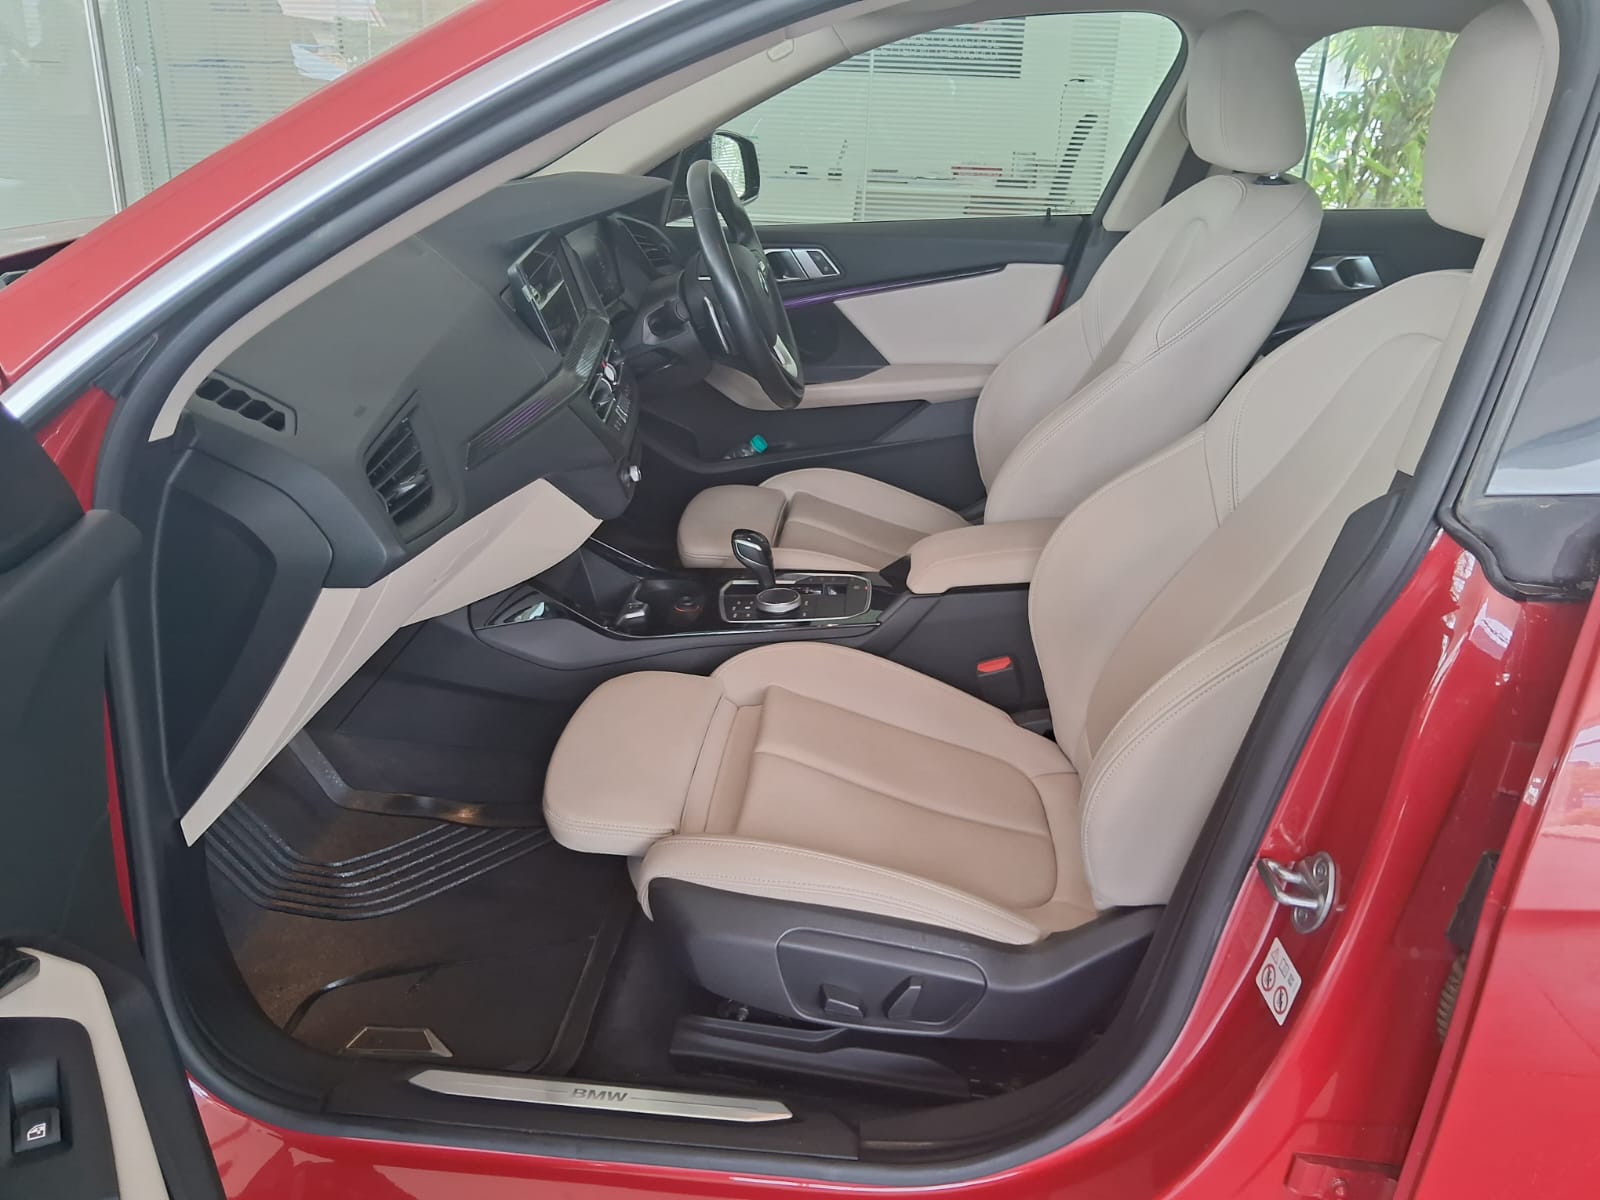 BMW 220d coupe sportline front seat